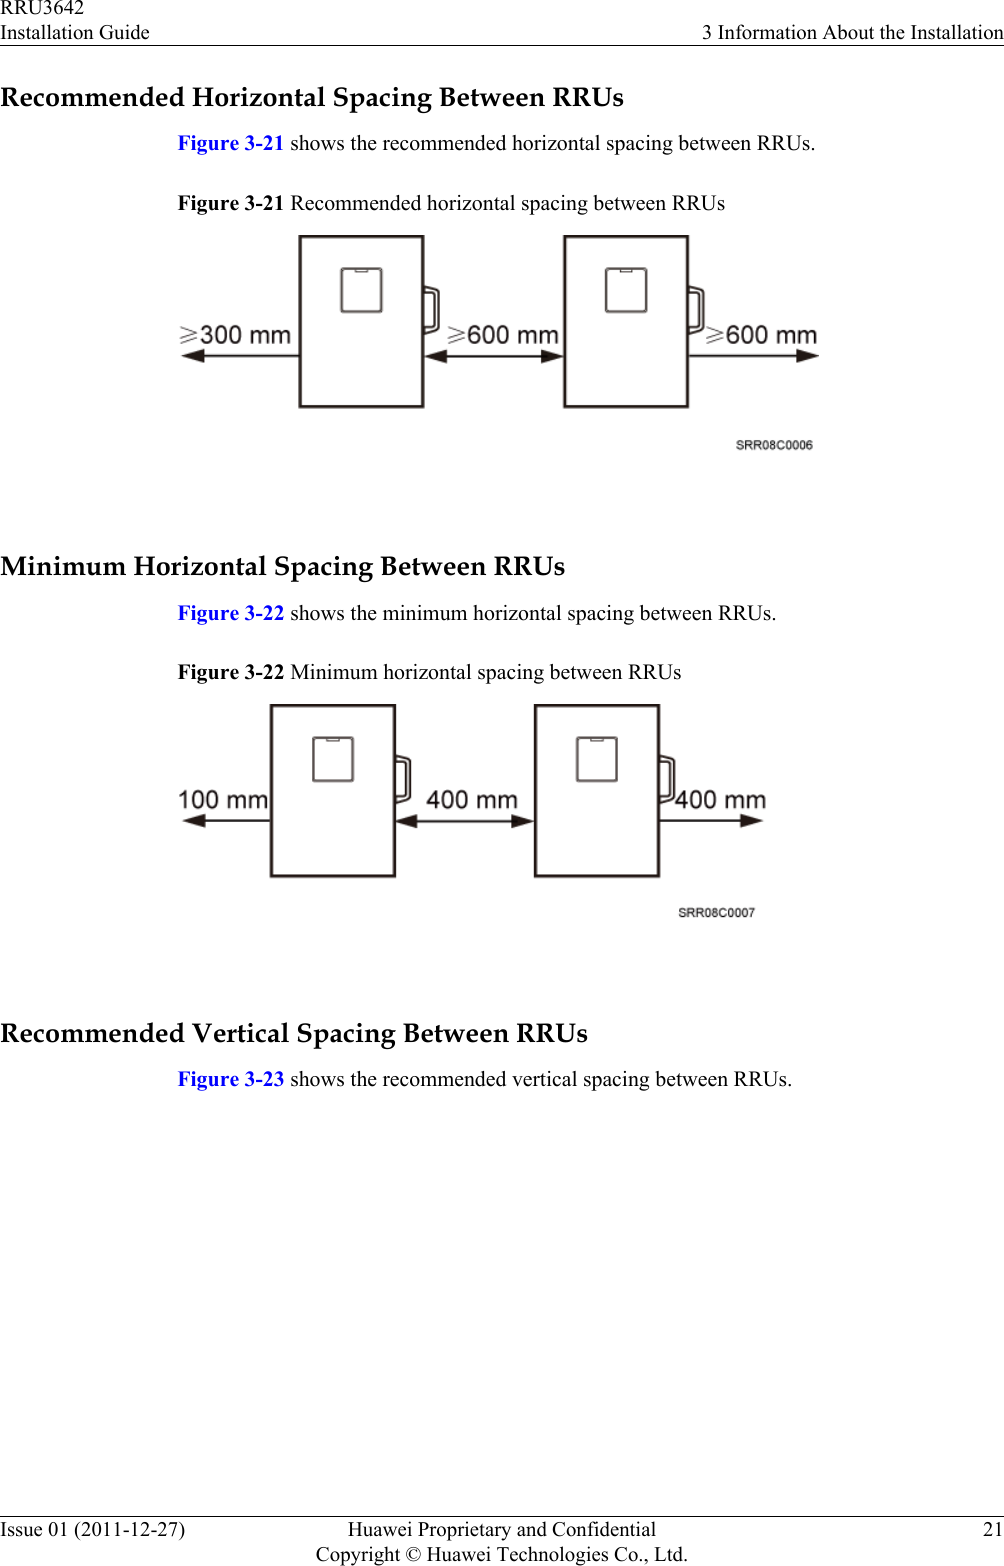 Recommended Horizontal Spacing Between RRUsFigure 3-21 shows the recommended horizontal spacing between RRUs.Figure 3-21 Recommended horizontal spacing between RRUs Minimum Horizontal Spacing Between RRUsFigure 3-22 shows the minimum horizontal spacing between RRUs.Figure 3-22 Minimum horizontal spacing between RRUs Recommended Vertical Spacing Between RRUsFigure 3-23 shows the recommended vertical spacing between RRUs.RRU3642Installation Guide 3 Information About the InstallationIssue 01 (2011-12-27) Huawei Proprietary and ConfidentialCopyright © Huawei Technologies Co., Ltd.21